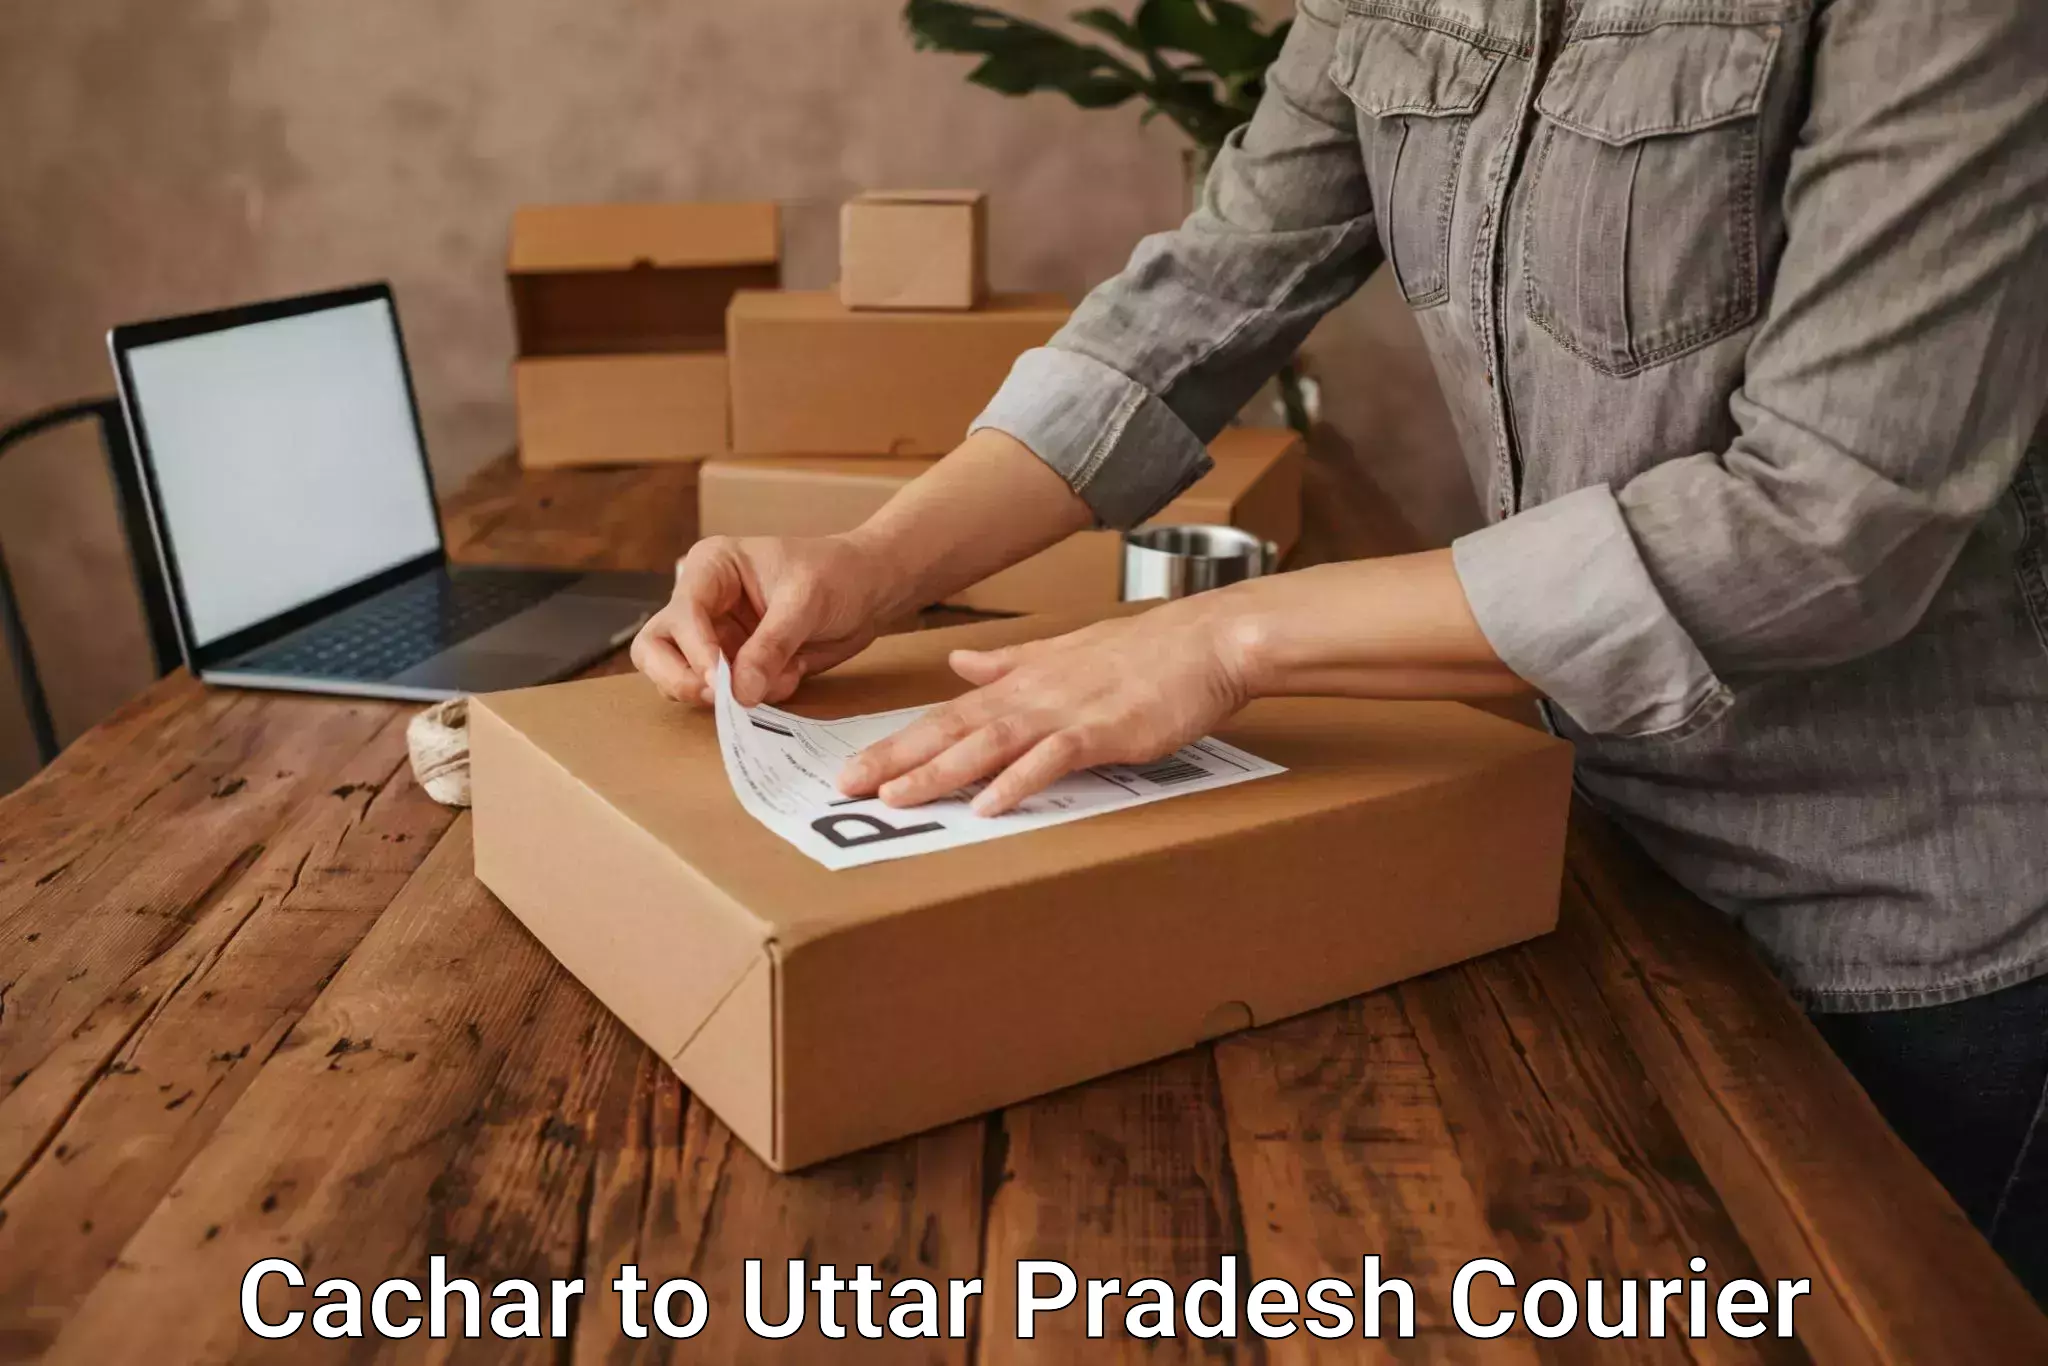 Professional courier handling in Cachar to Kanpur